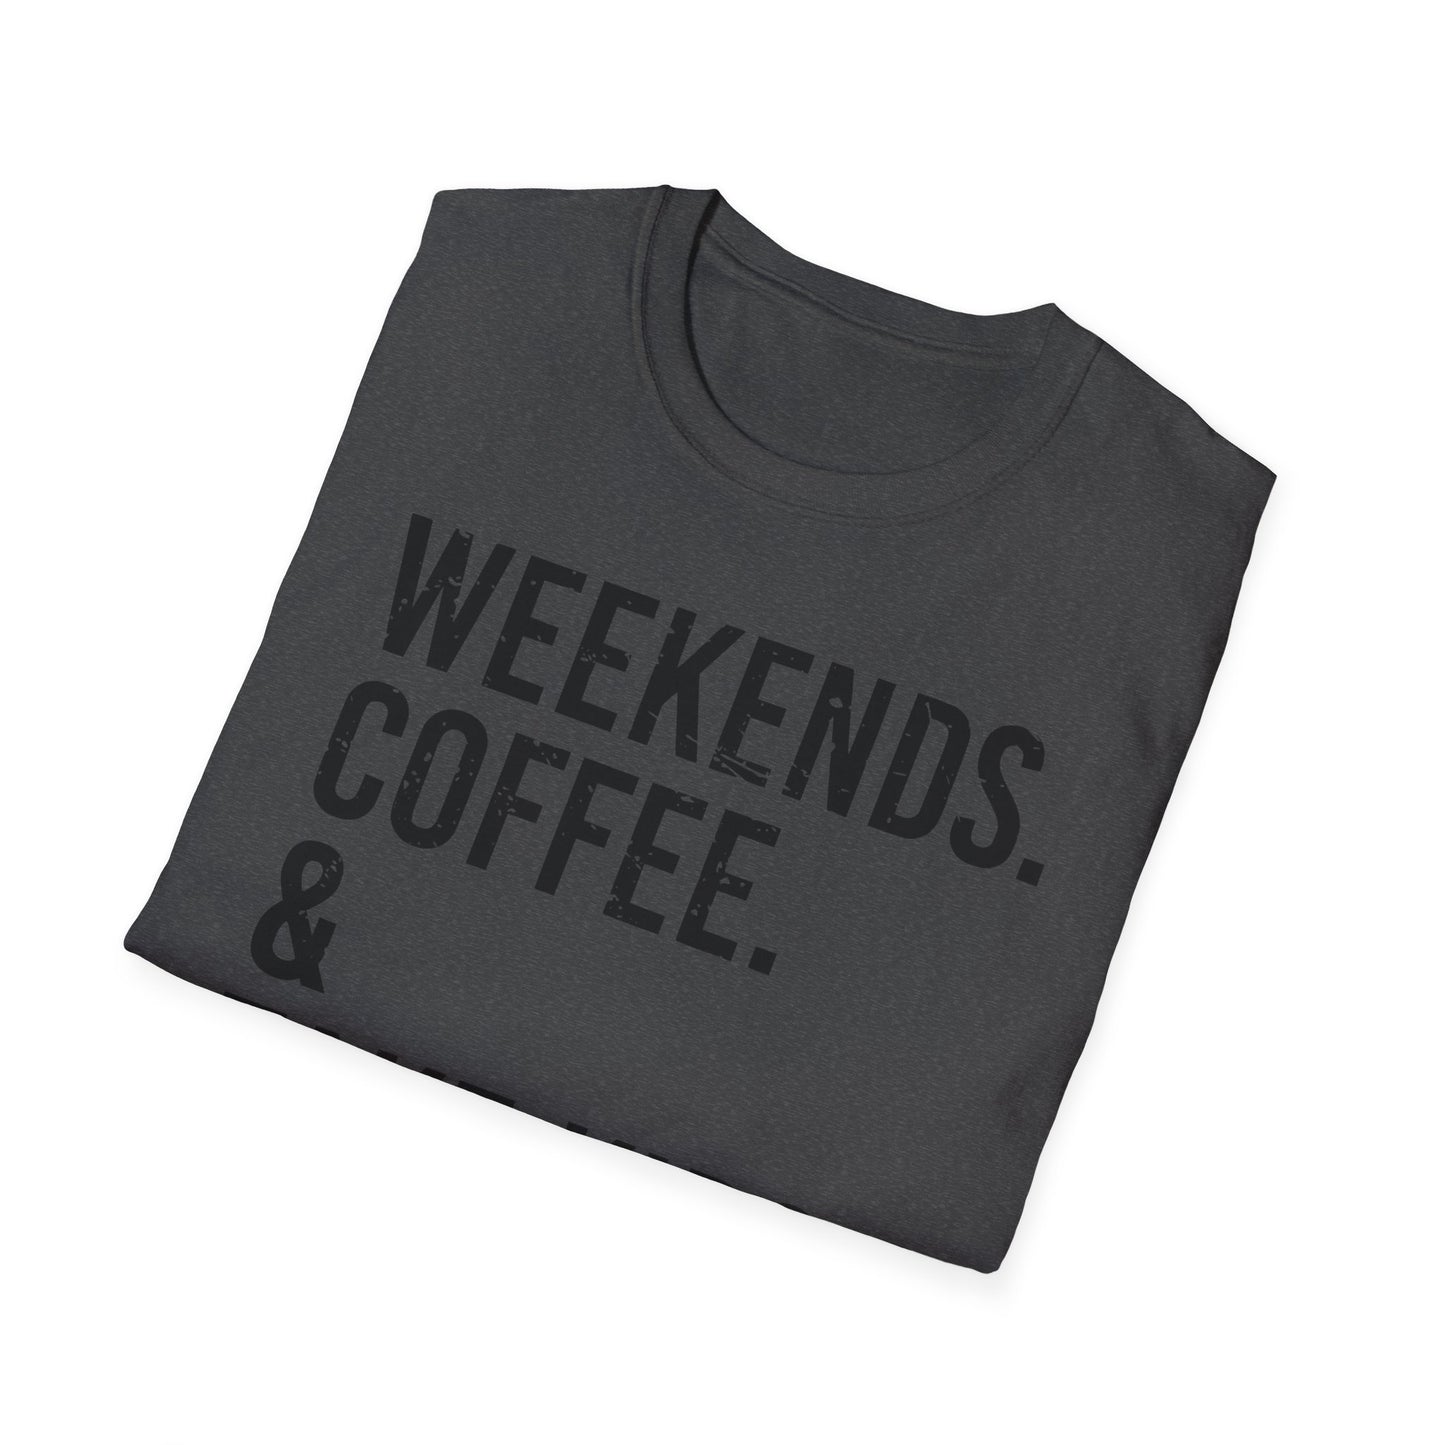 Weekends Coffee Sports - Unisex Softstyle T-Shirt